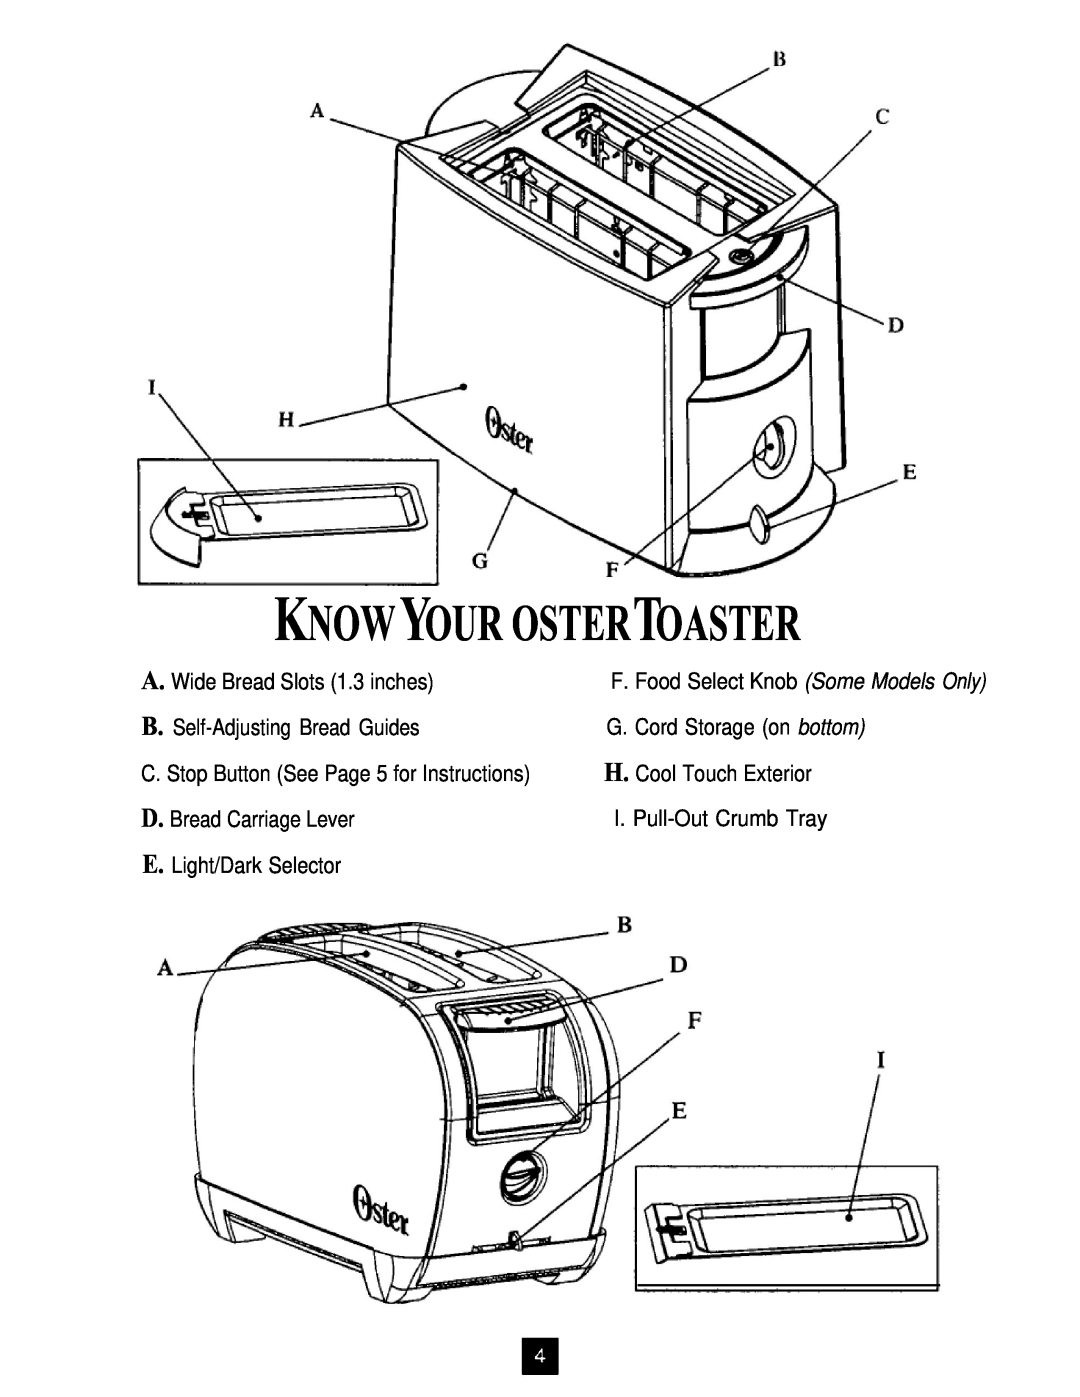 Oster TOASTERS instruction manual Knowyour Ostertoaster, A. Wide Bread Slots 1.3 inches B. Self-Adjusting Bread Guides 